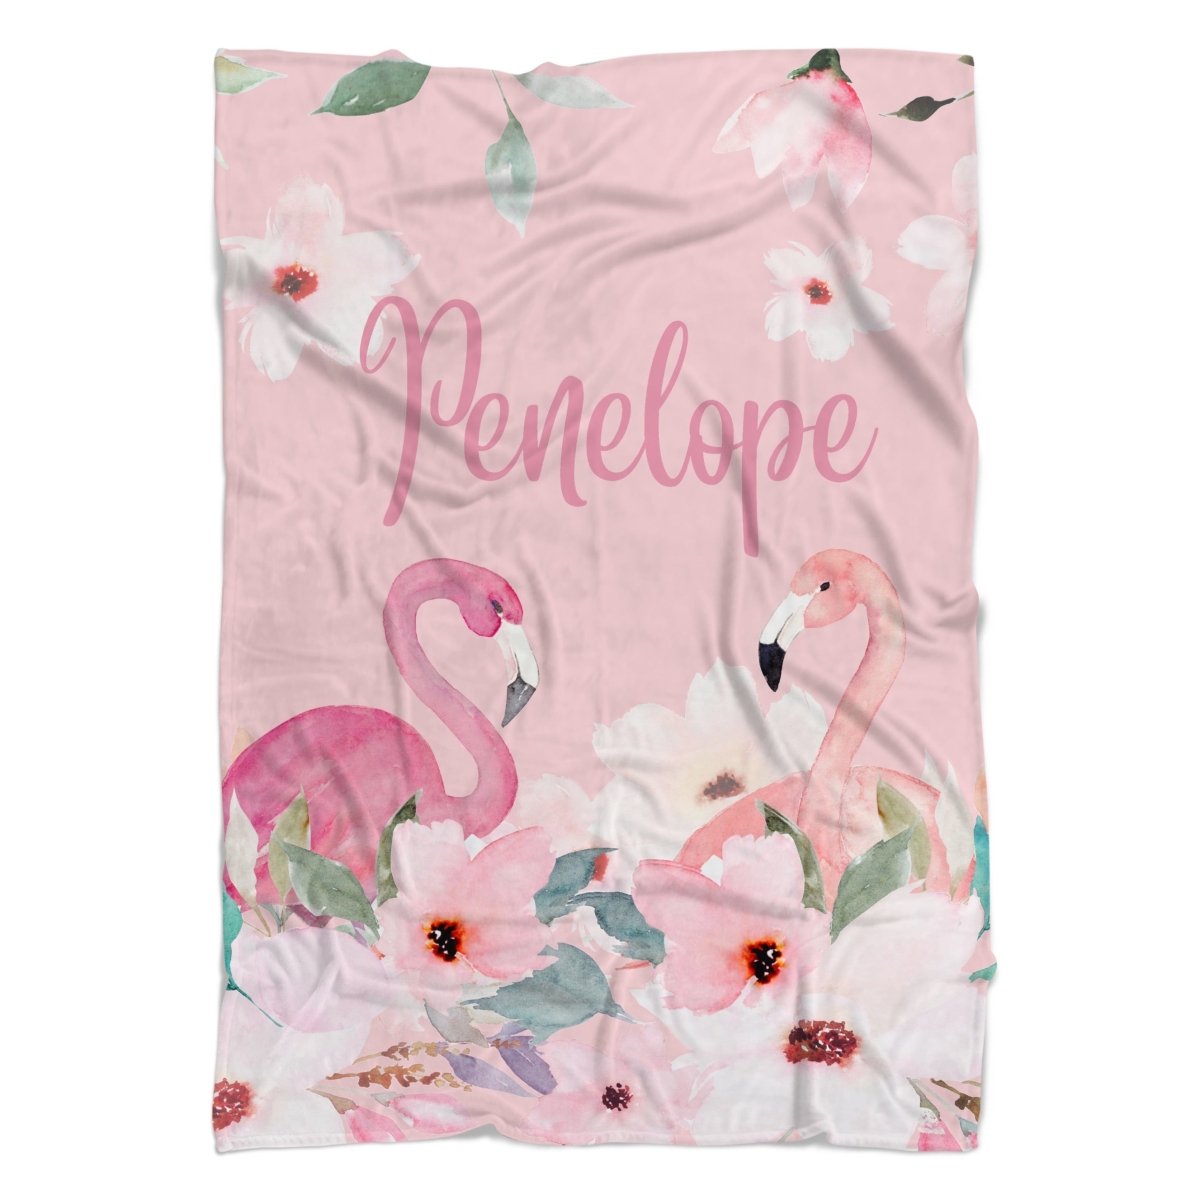 Flamingo Floral Personalized Minky Blanket - Flamingo Floral, gender_girl, text